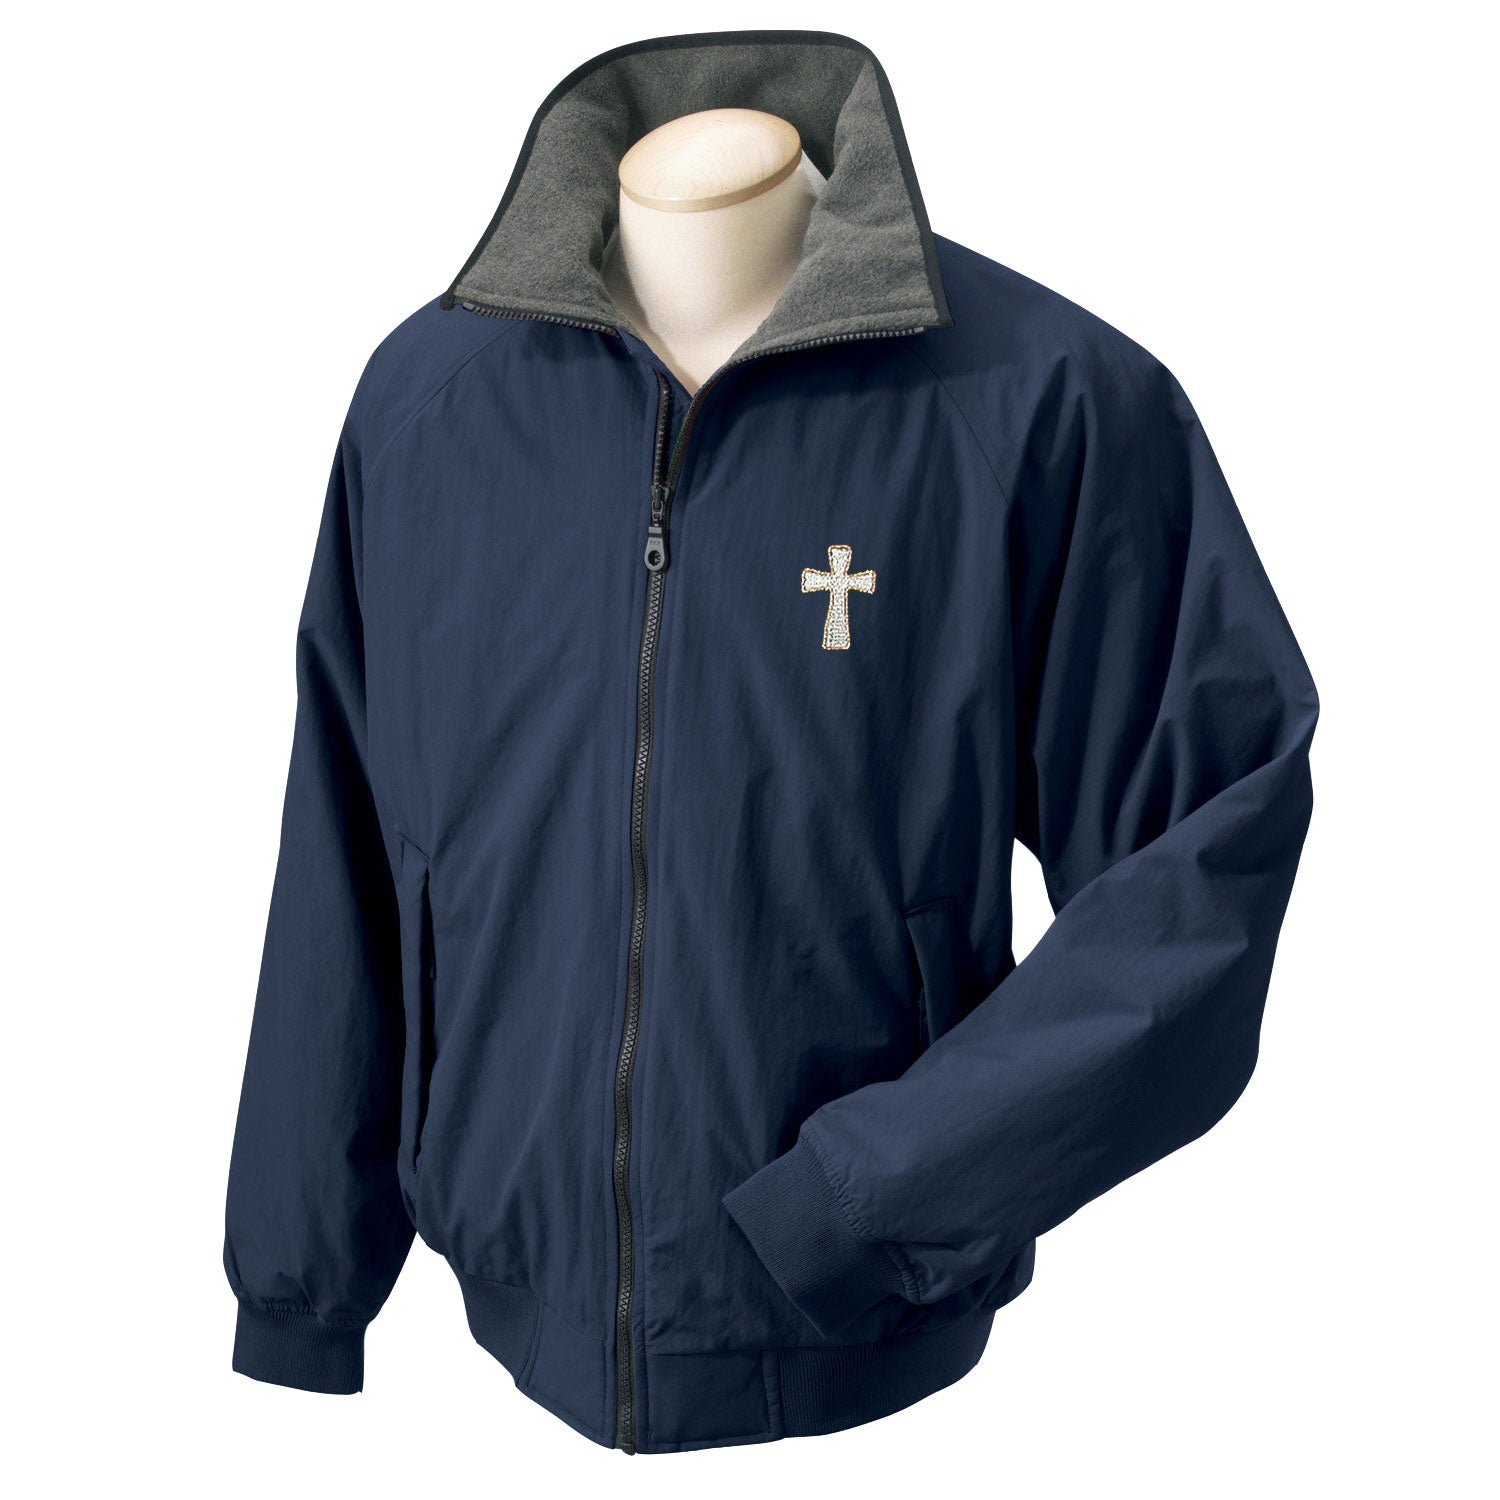 Clergy Jacket Embroidered with Cross